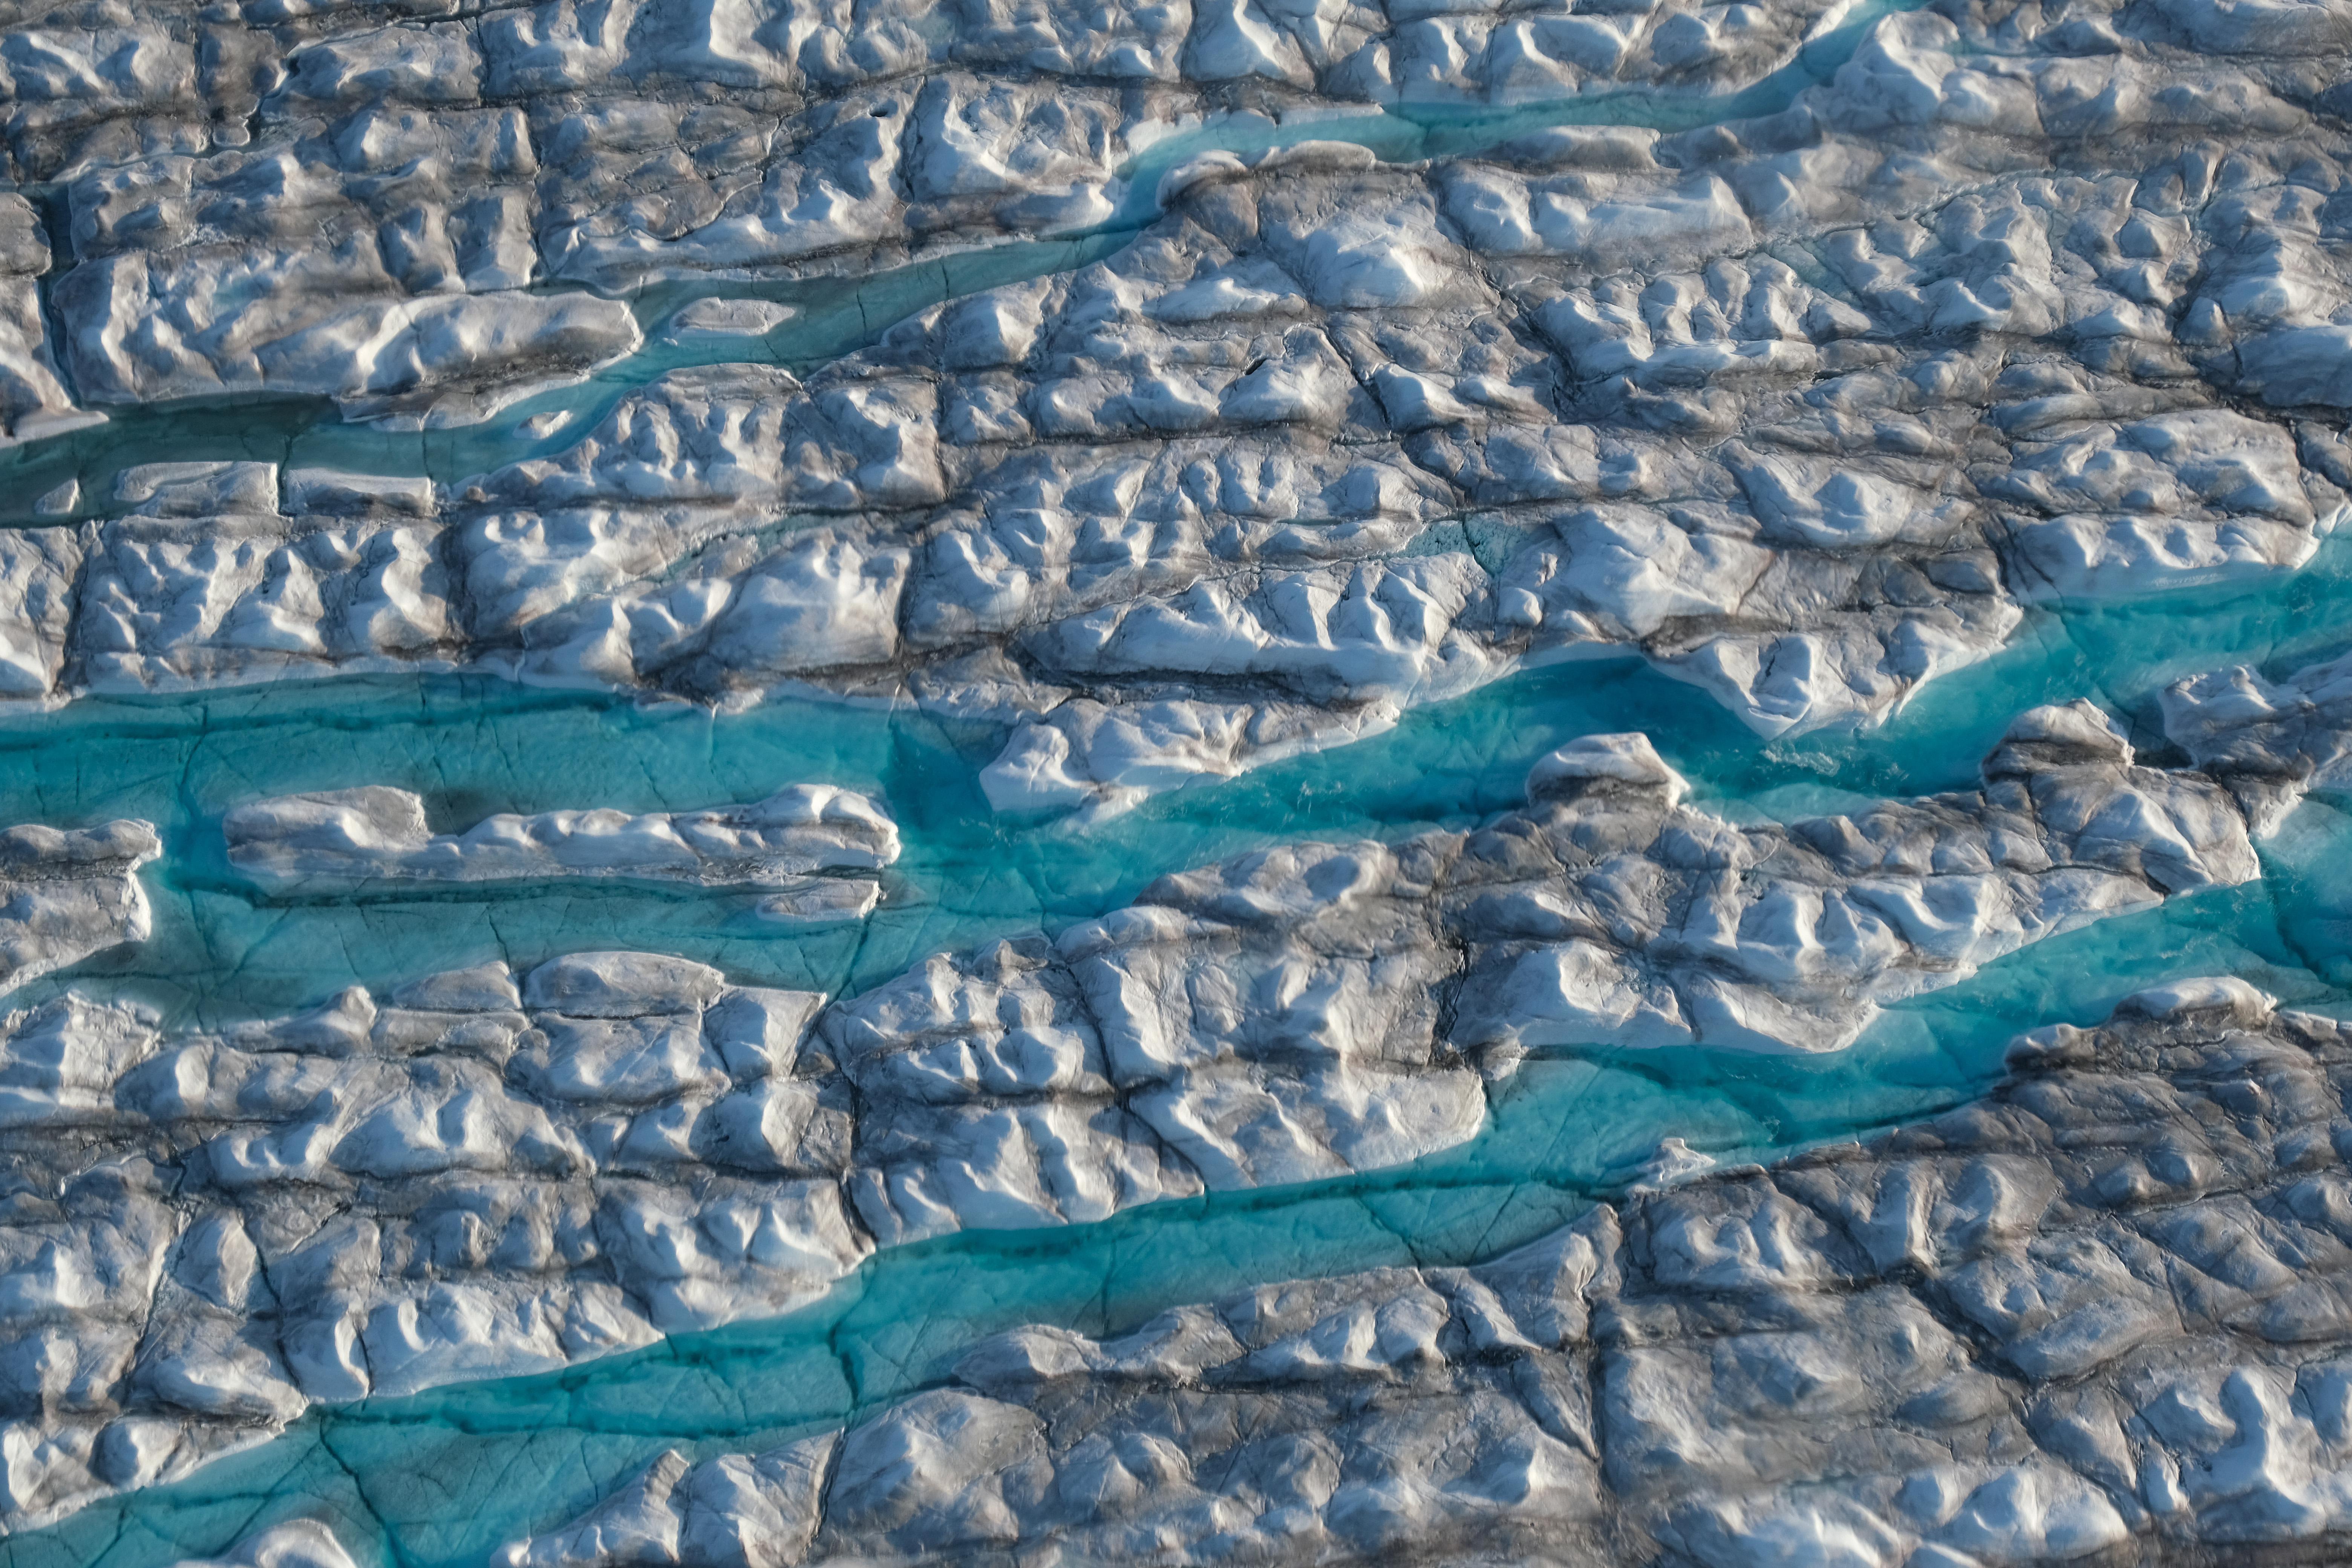 Aerial view of rivers of meltwater carving into the Greenland ice sheet near Ilulissat, Greenland. 